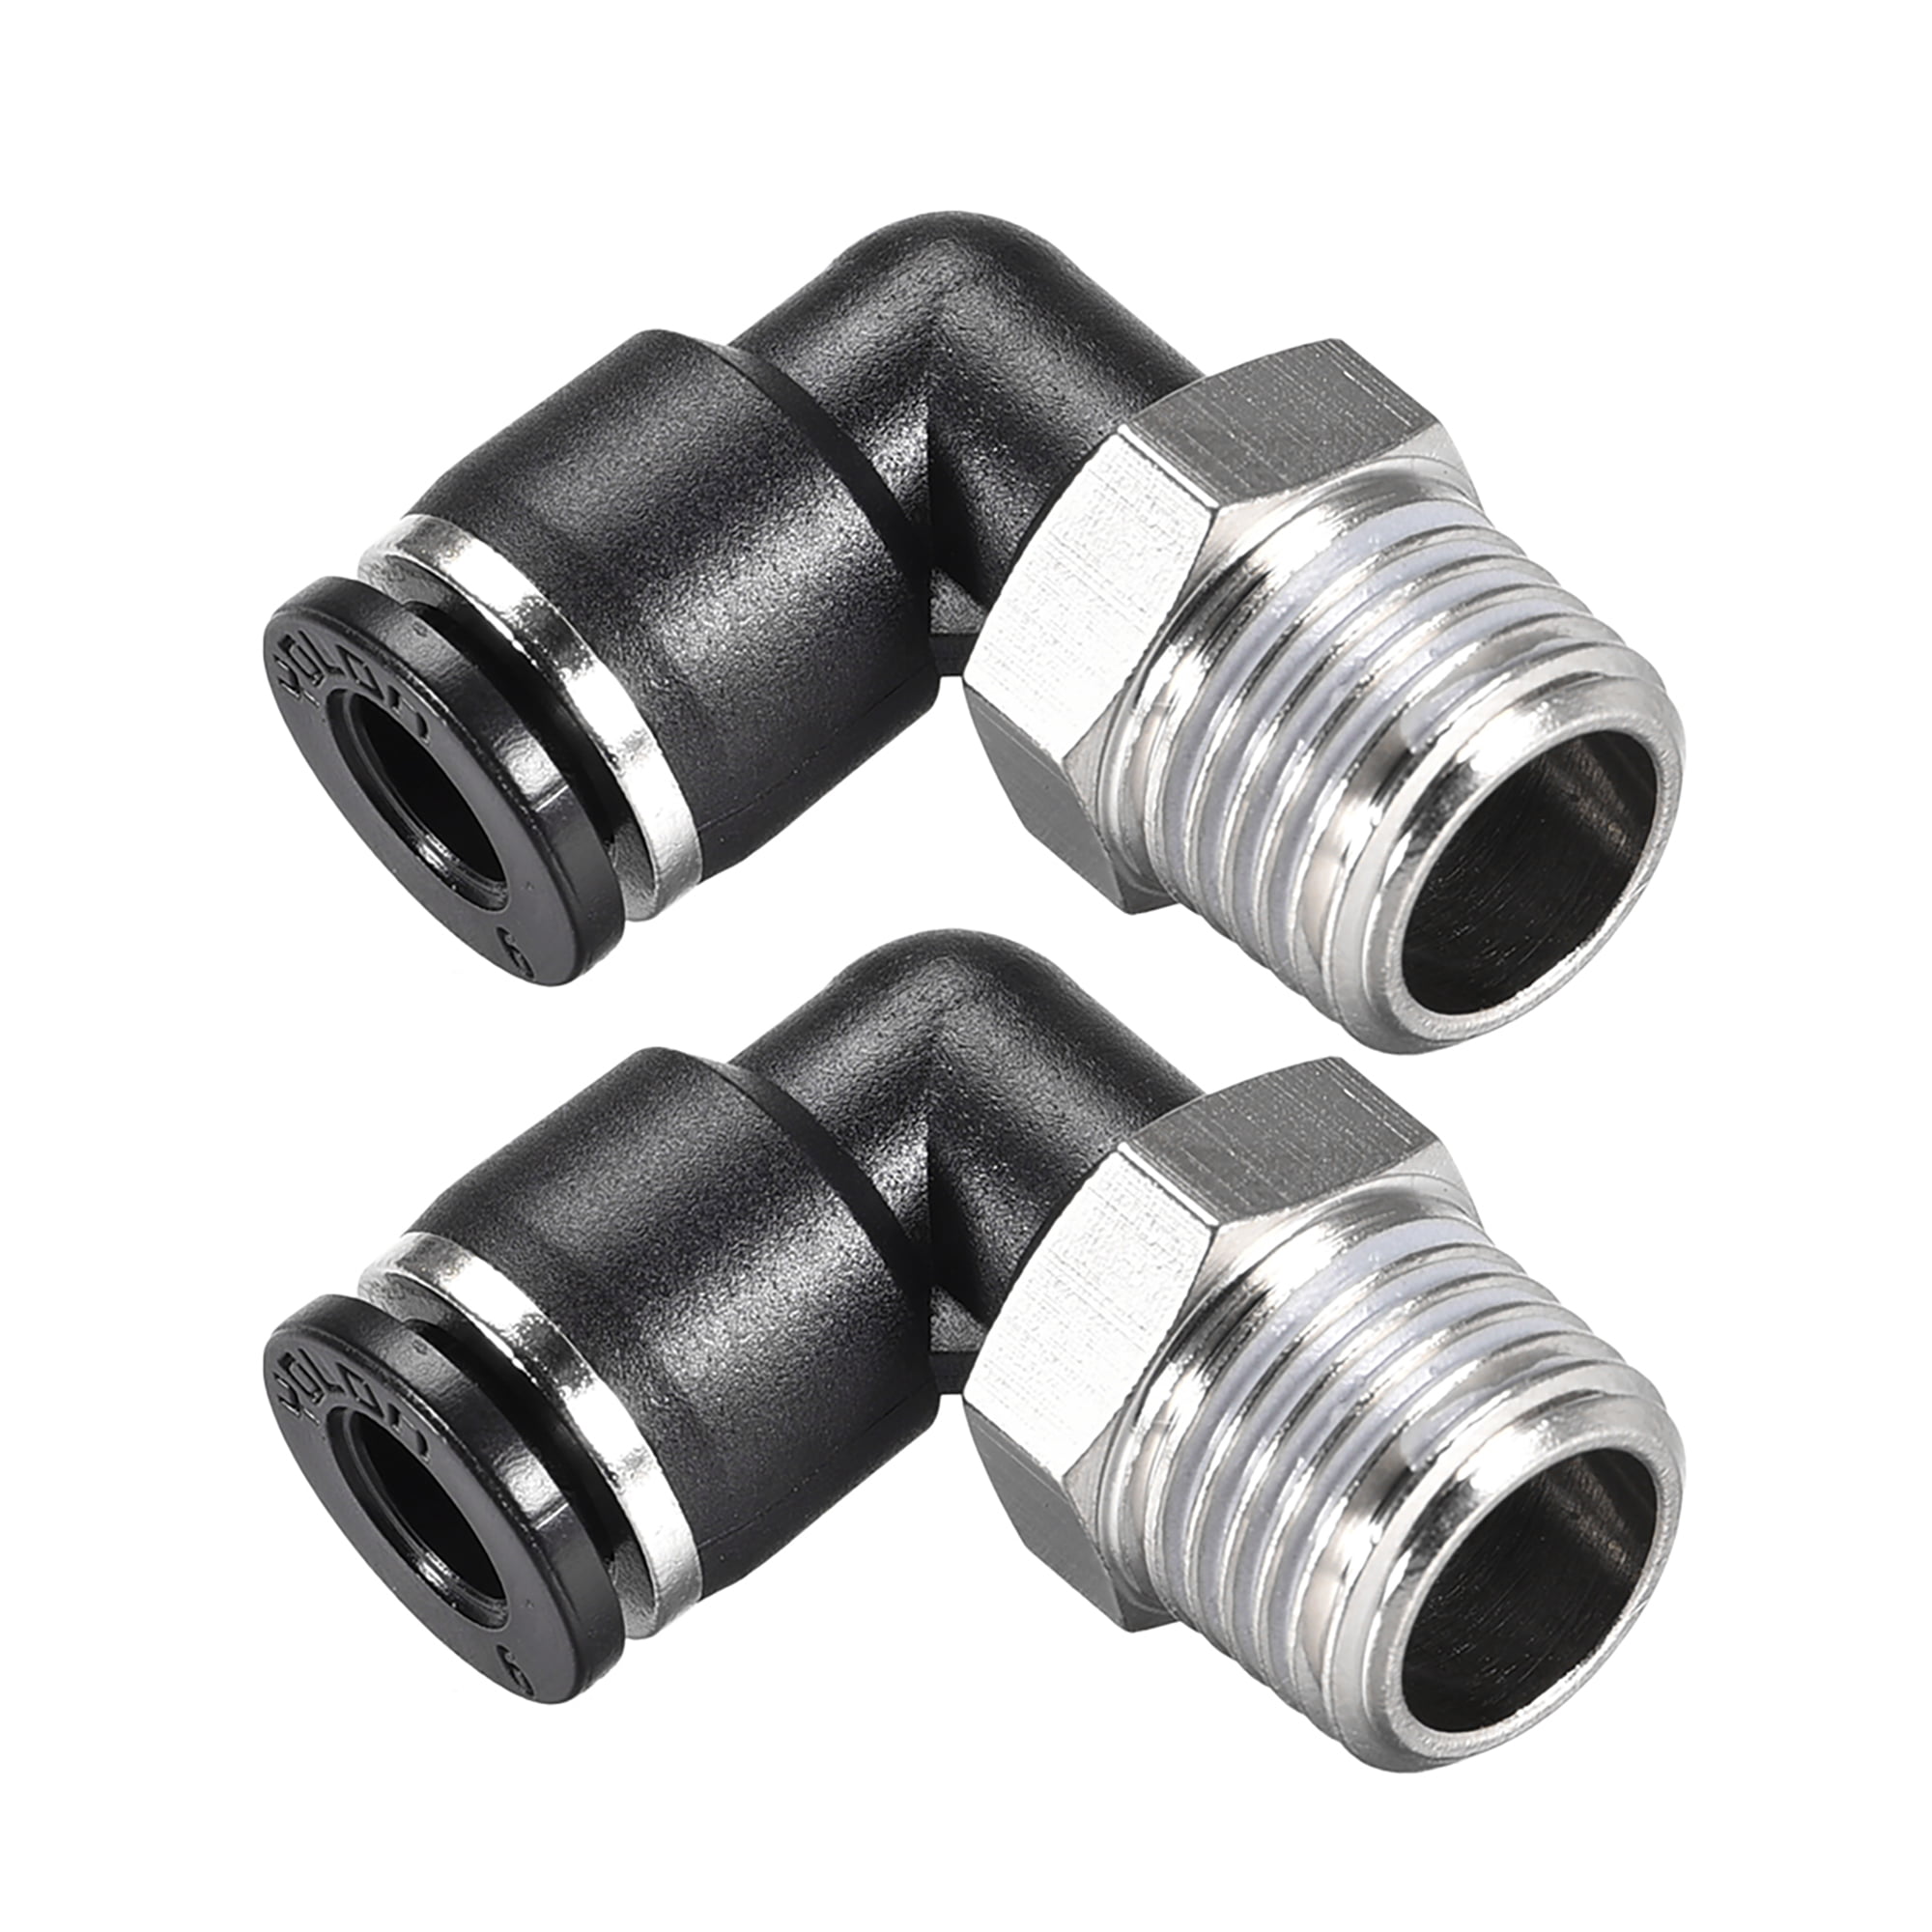 Push to Connect Tube Fitting Male Elbow,6mm Tube OD x 1/4 NPT Thread 6mm Vs 1 4 Tubing